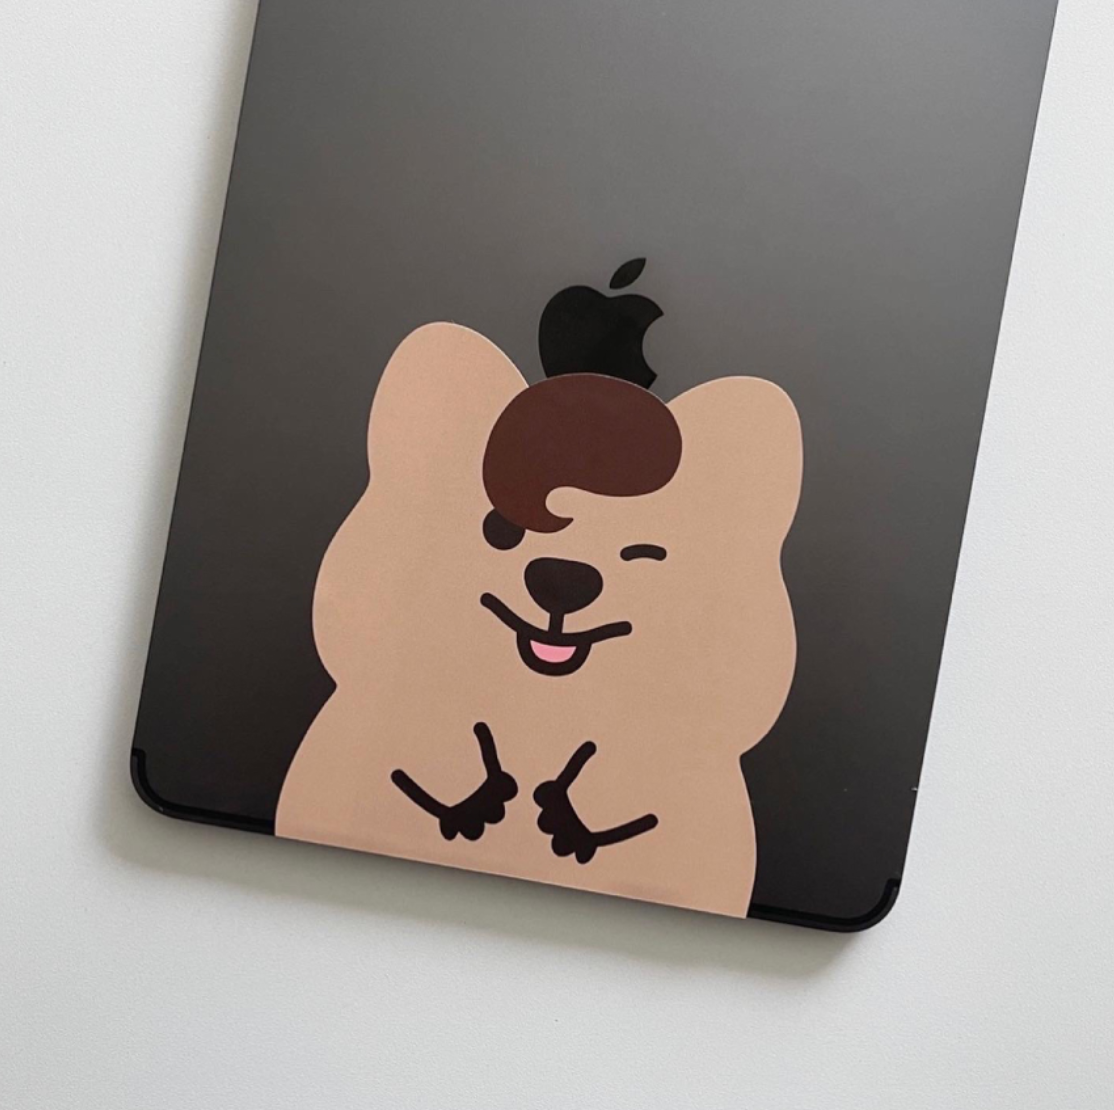 [YOUNG FOREST] Wink Quokka Removable Sticker